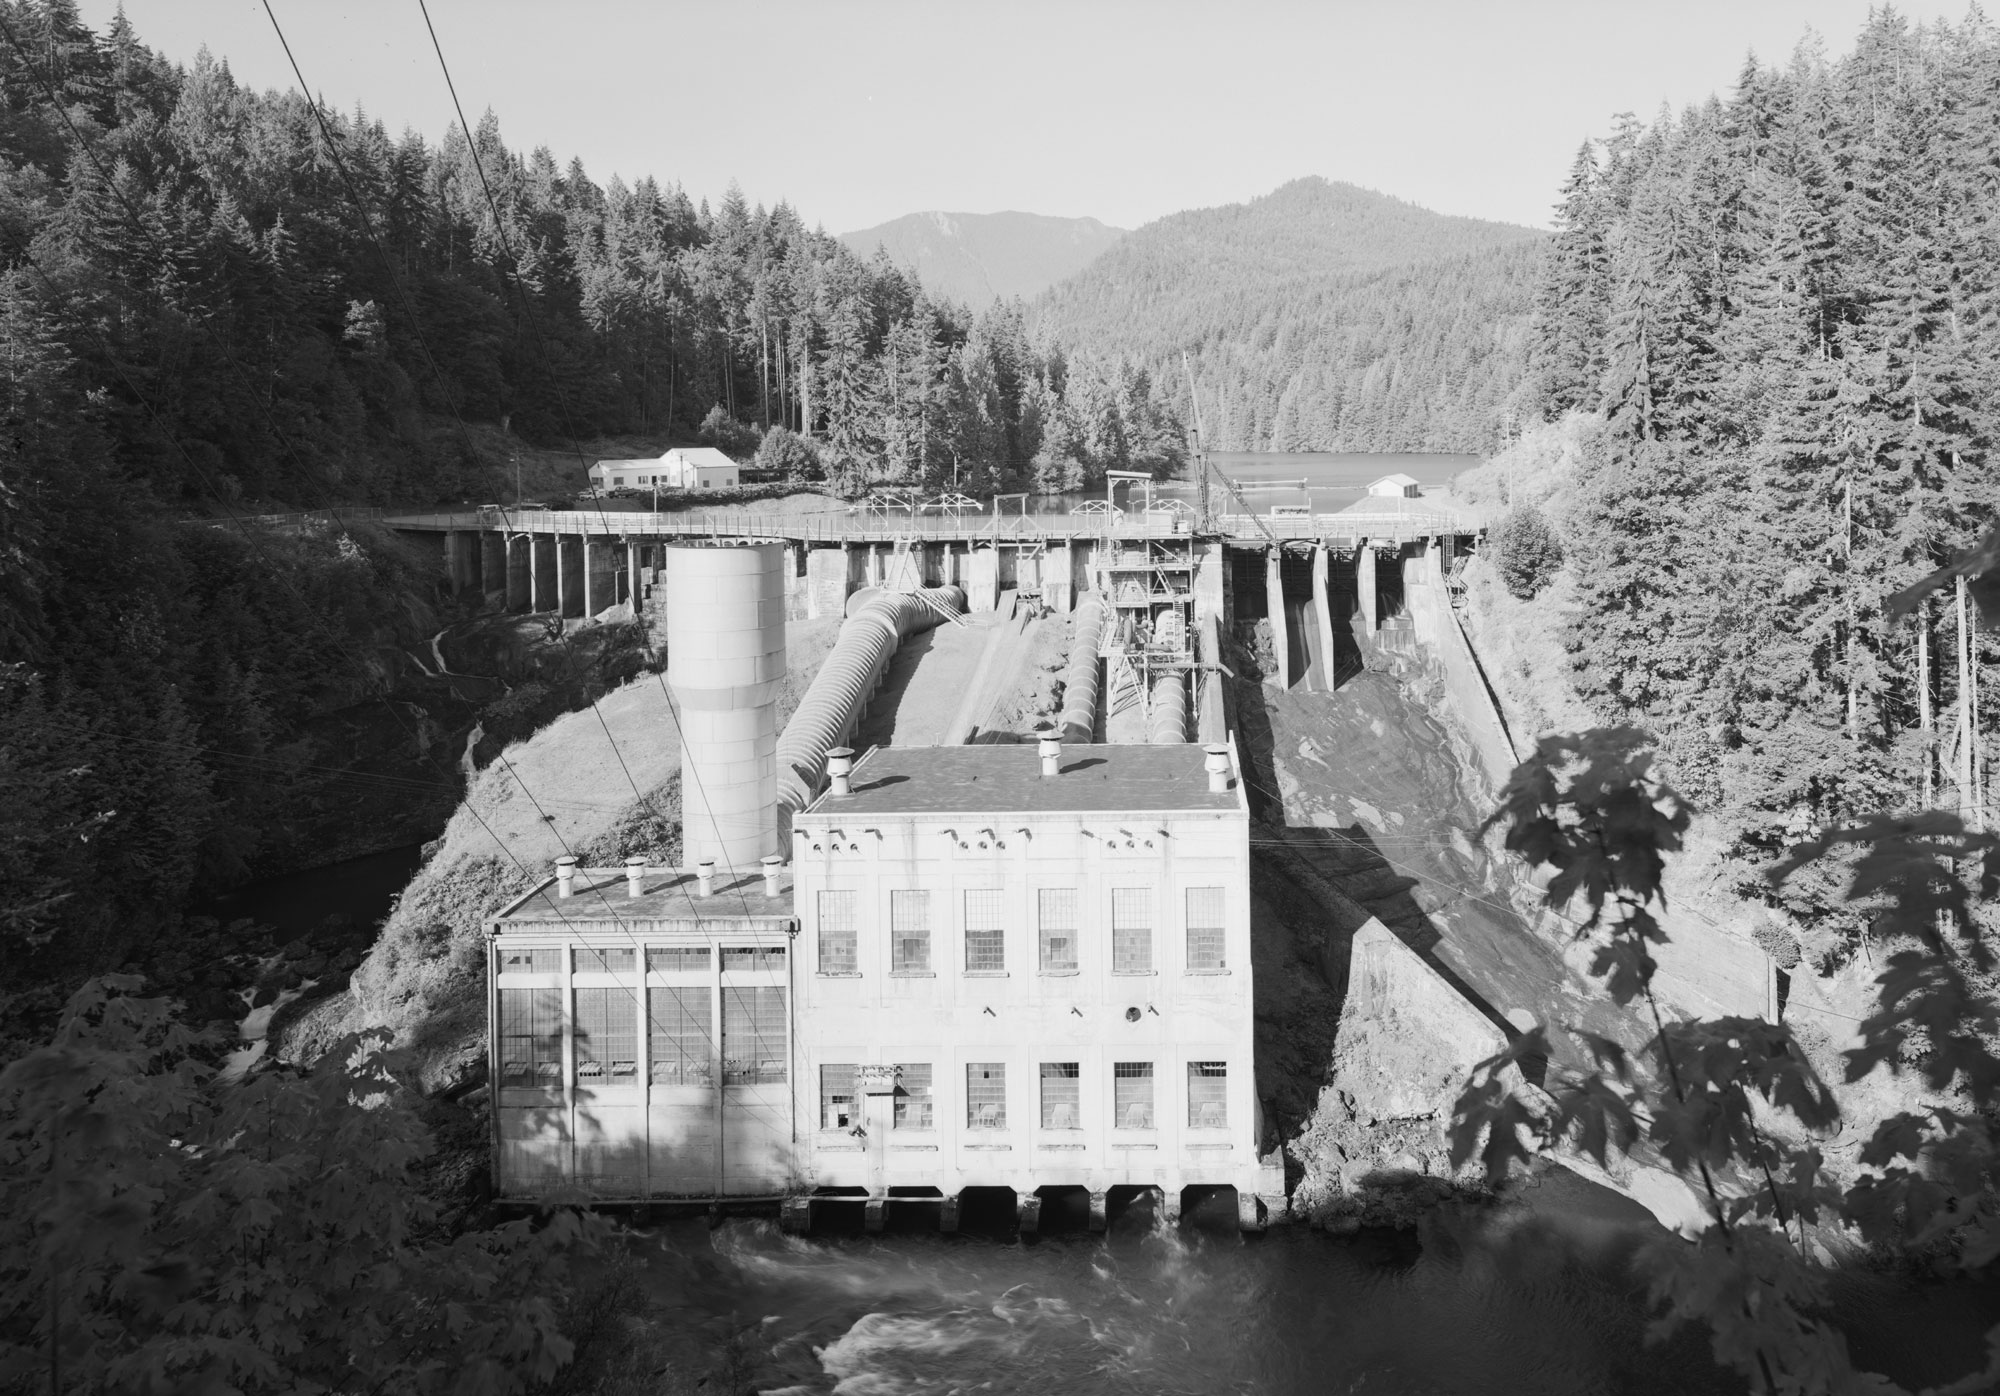 Black and white photograph of Elwha Dam and hydroelectric plant on the Elwha River in 1992. The photo shows the dam with a two-story building at its base. A cylindrical tower rises to the left of the building, beyond a shorter extension of the structure. A pipe runs from the dam to toward the building, the dam spillway it to the right. Hills covered with conifers arise around the dam and reservoir.